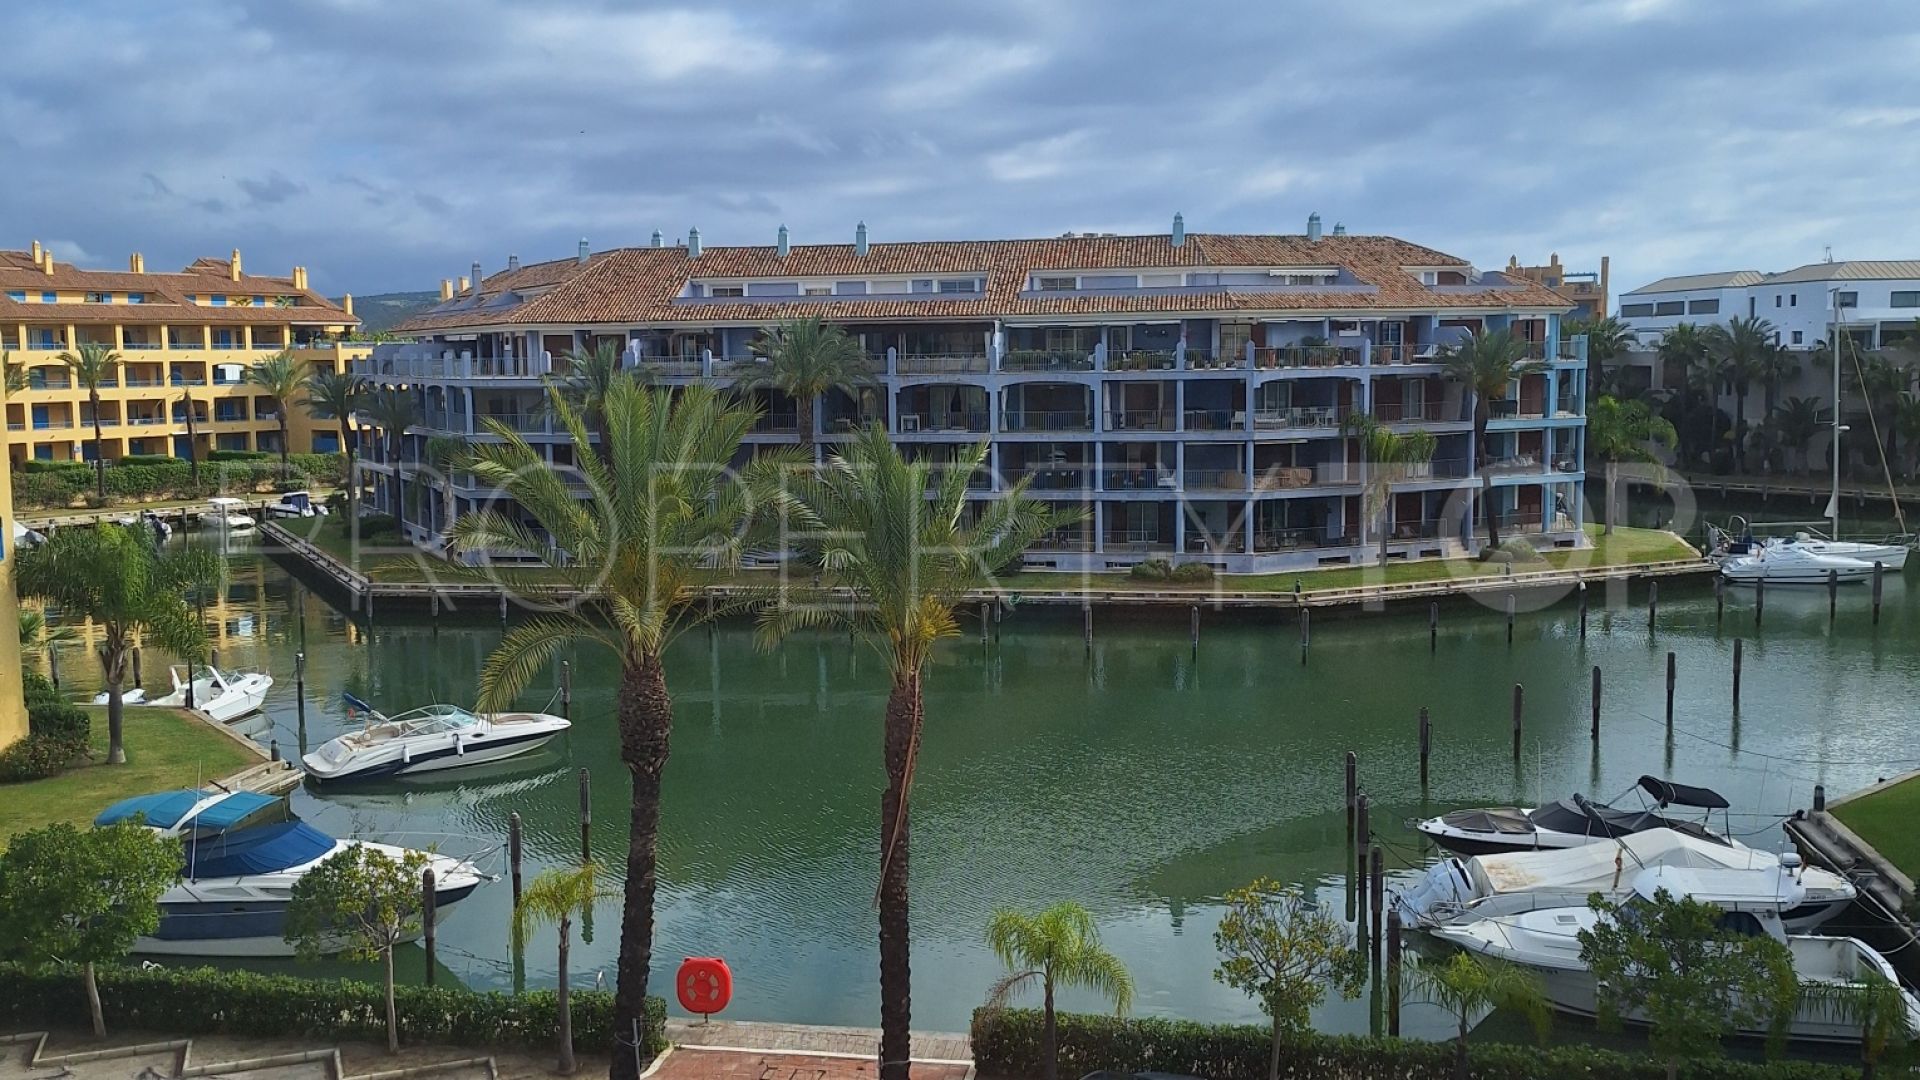 For sale apartment with 2 bedrooms in Ribera del Paraiso